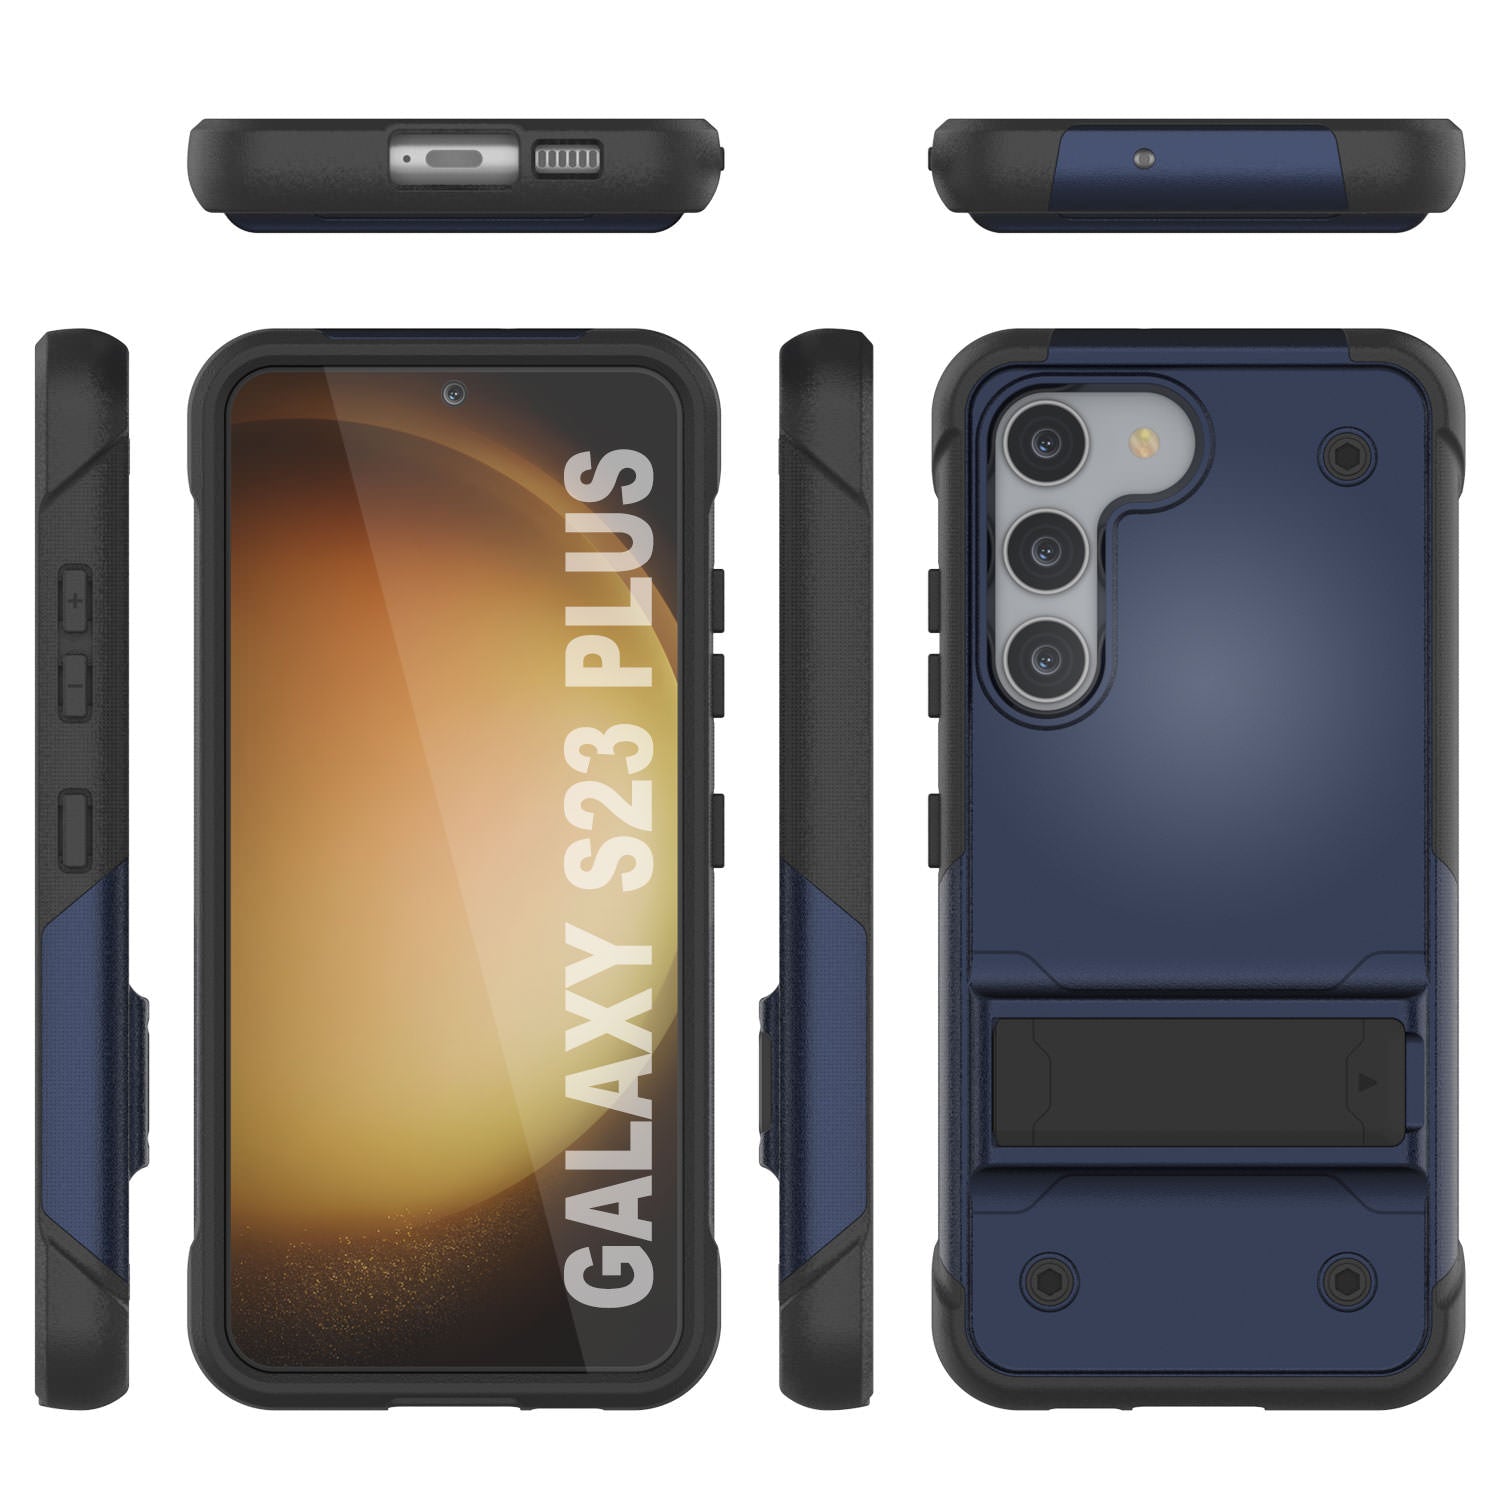 Punkcase Galaxy S23+ Plus Case [Reliance Series] Protective Hybrid Military Grade Cover W/Built-in Kickstand [Navy-Black]